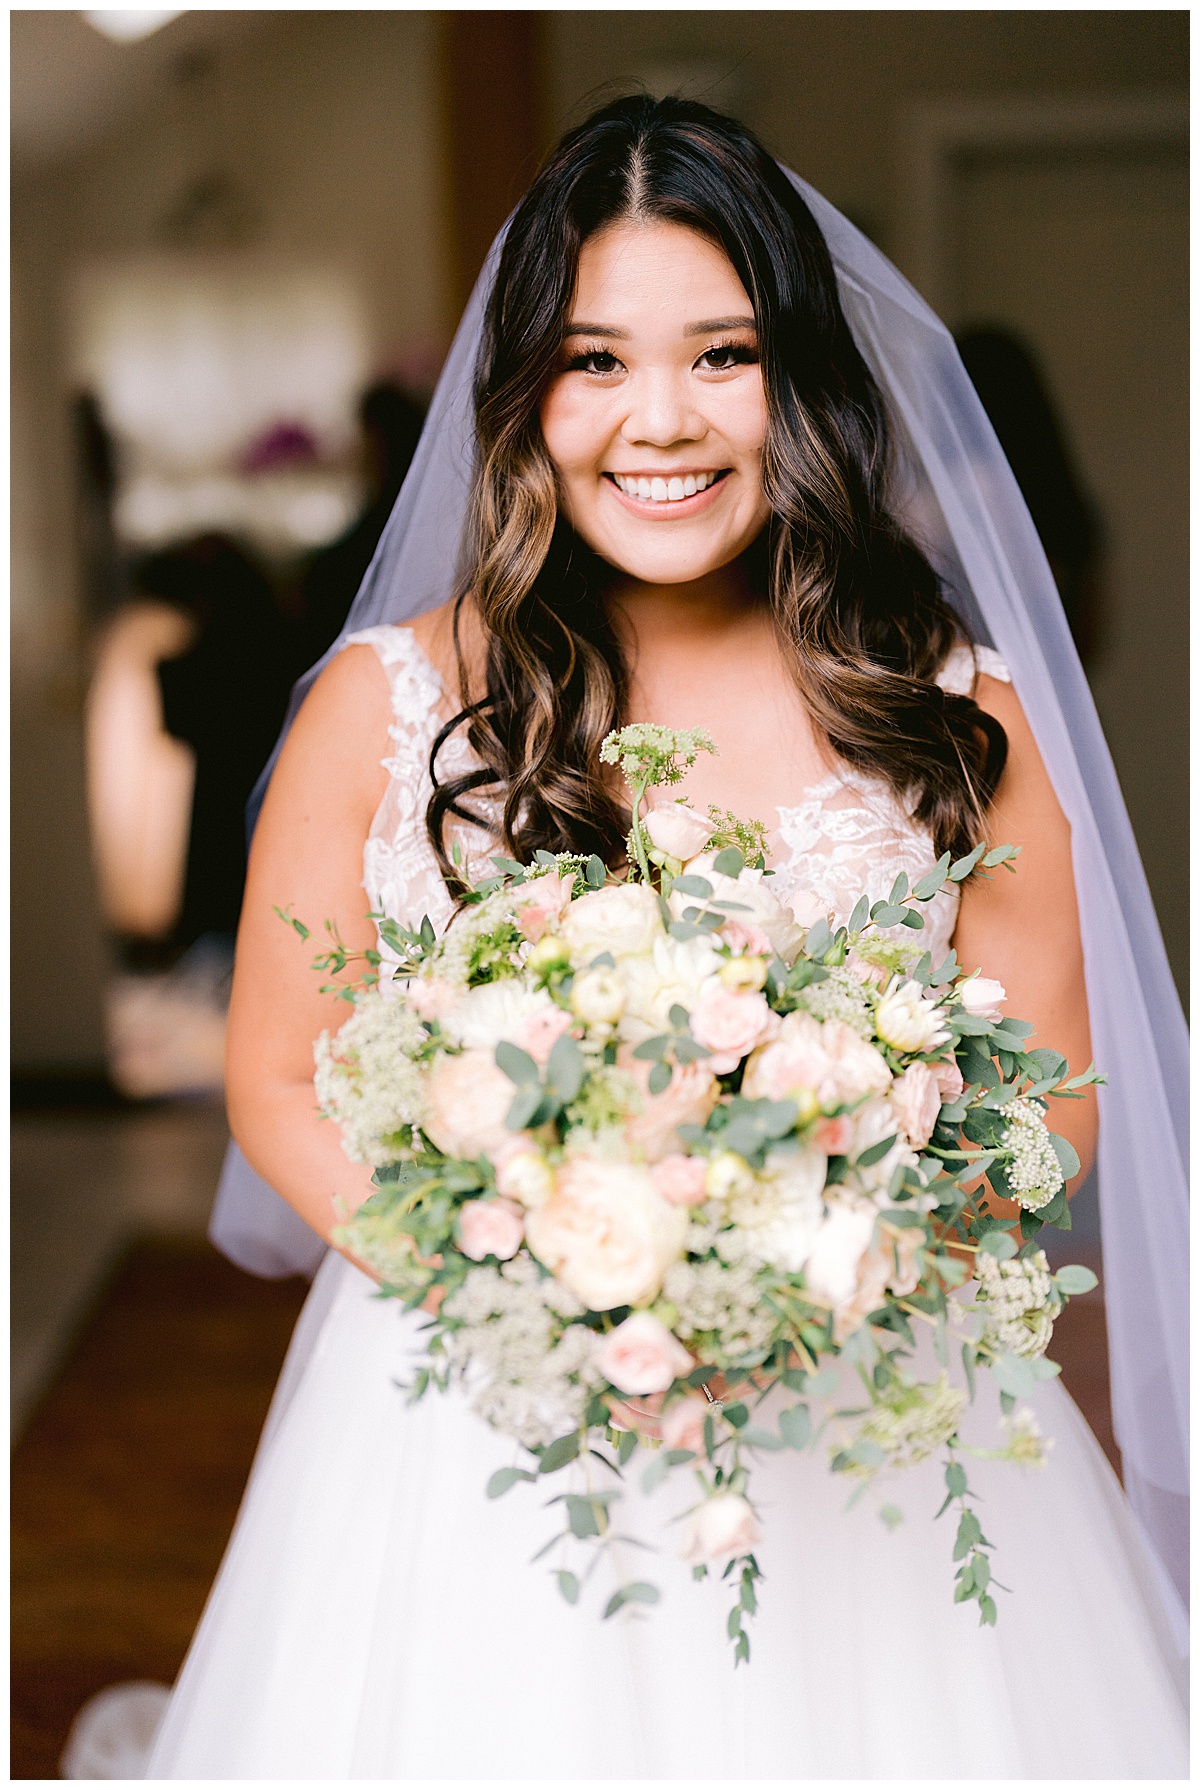 Brianna with her bridal bouquet